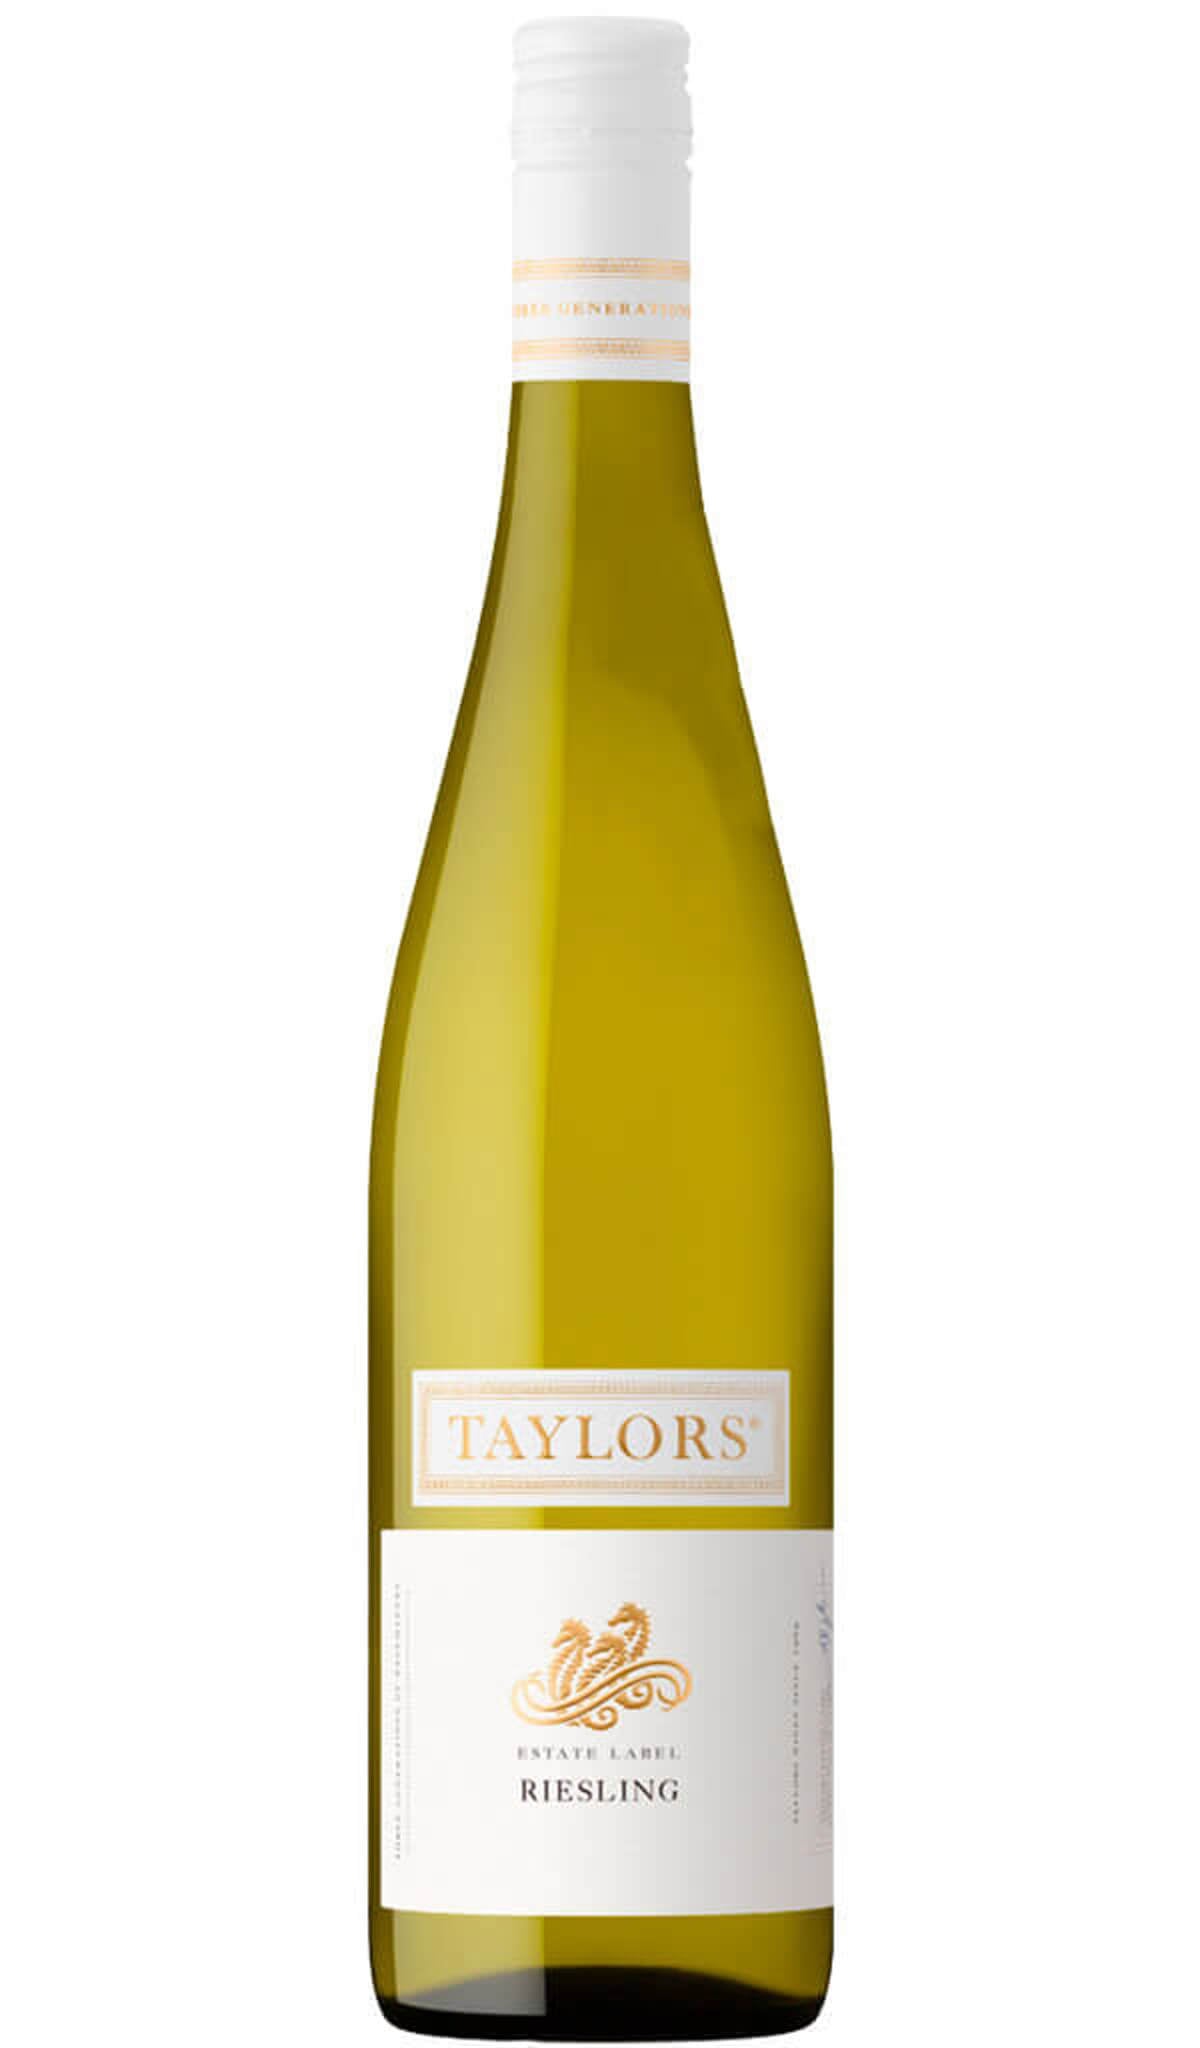 Find out more or buy Taylors Clare Valley Riesling 2023 online at Wine Sellers Direct - Australia’s independent liquor specialists.